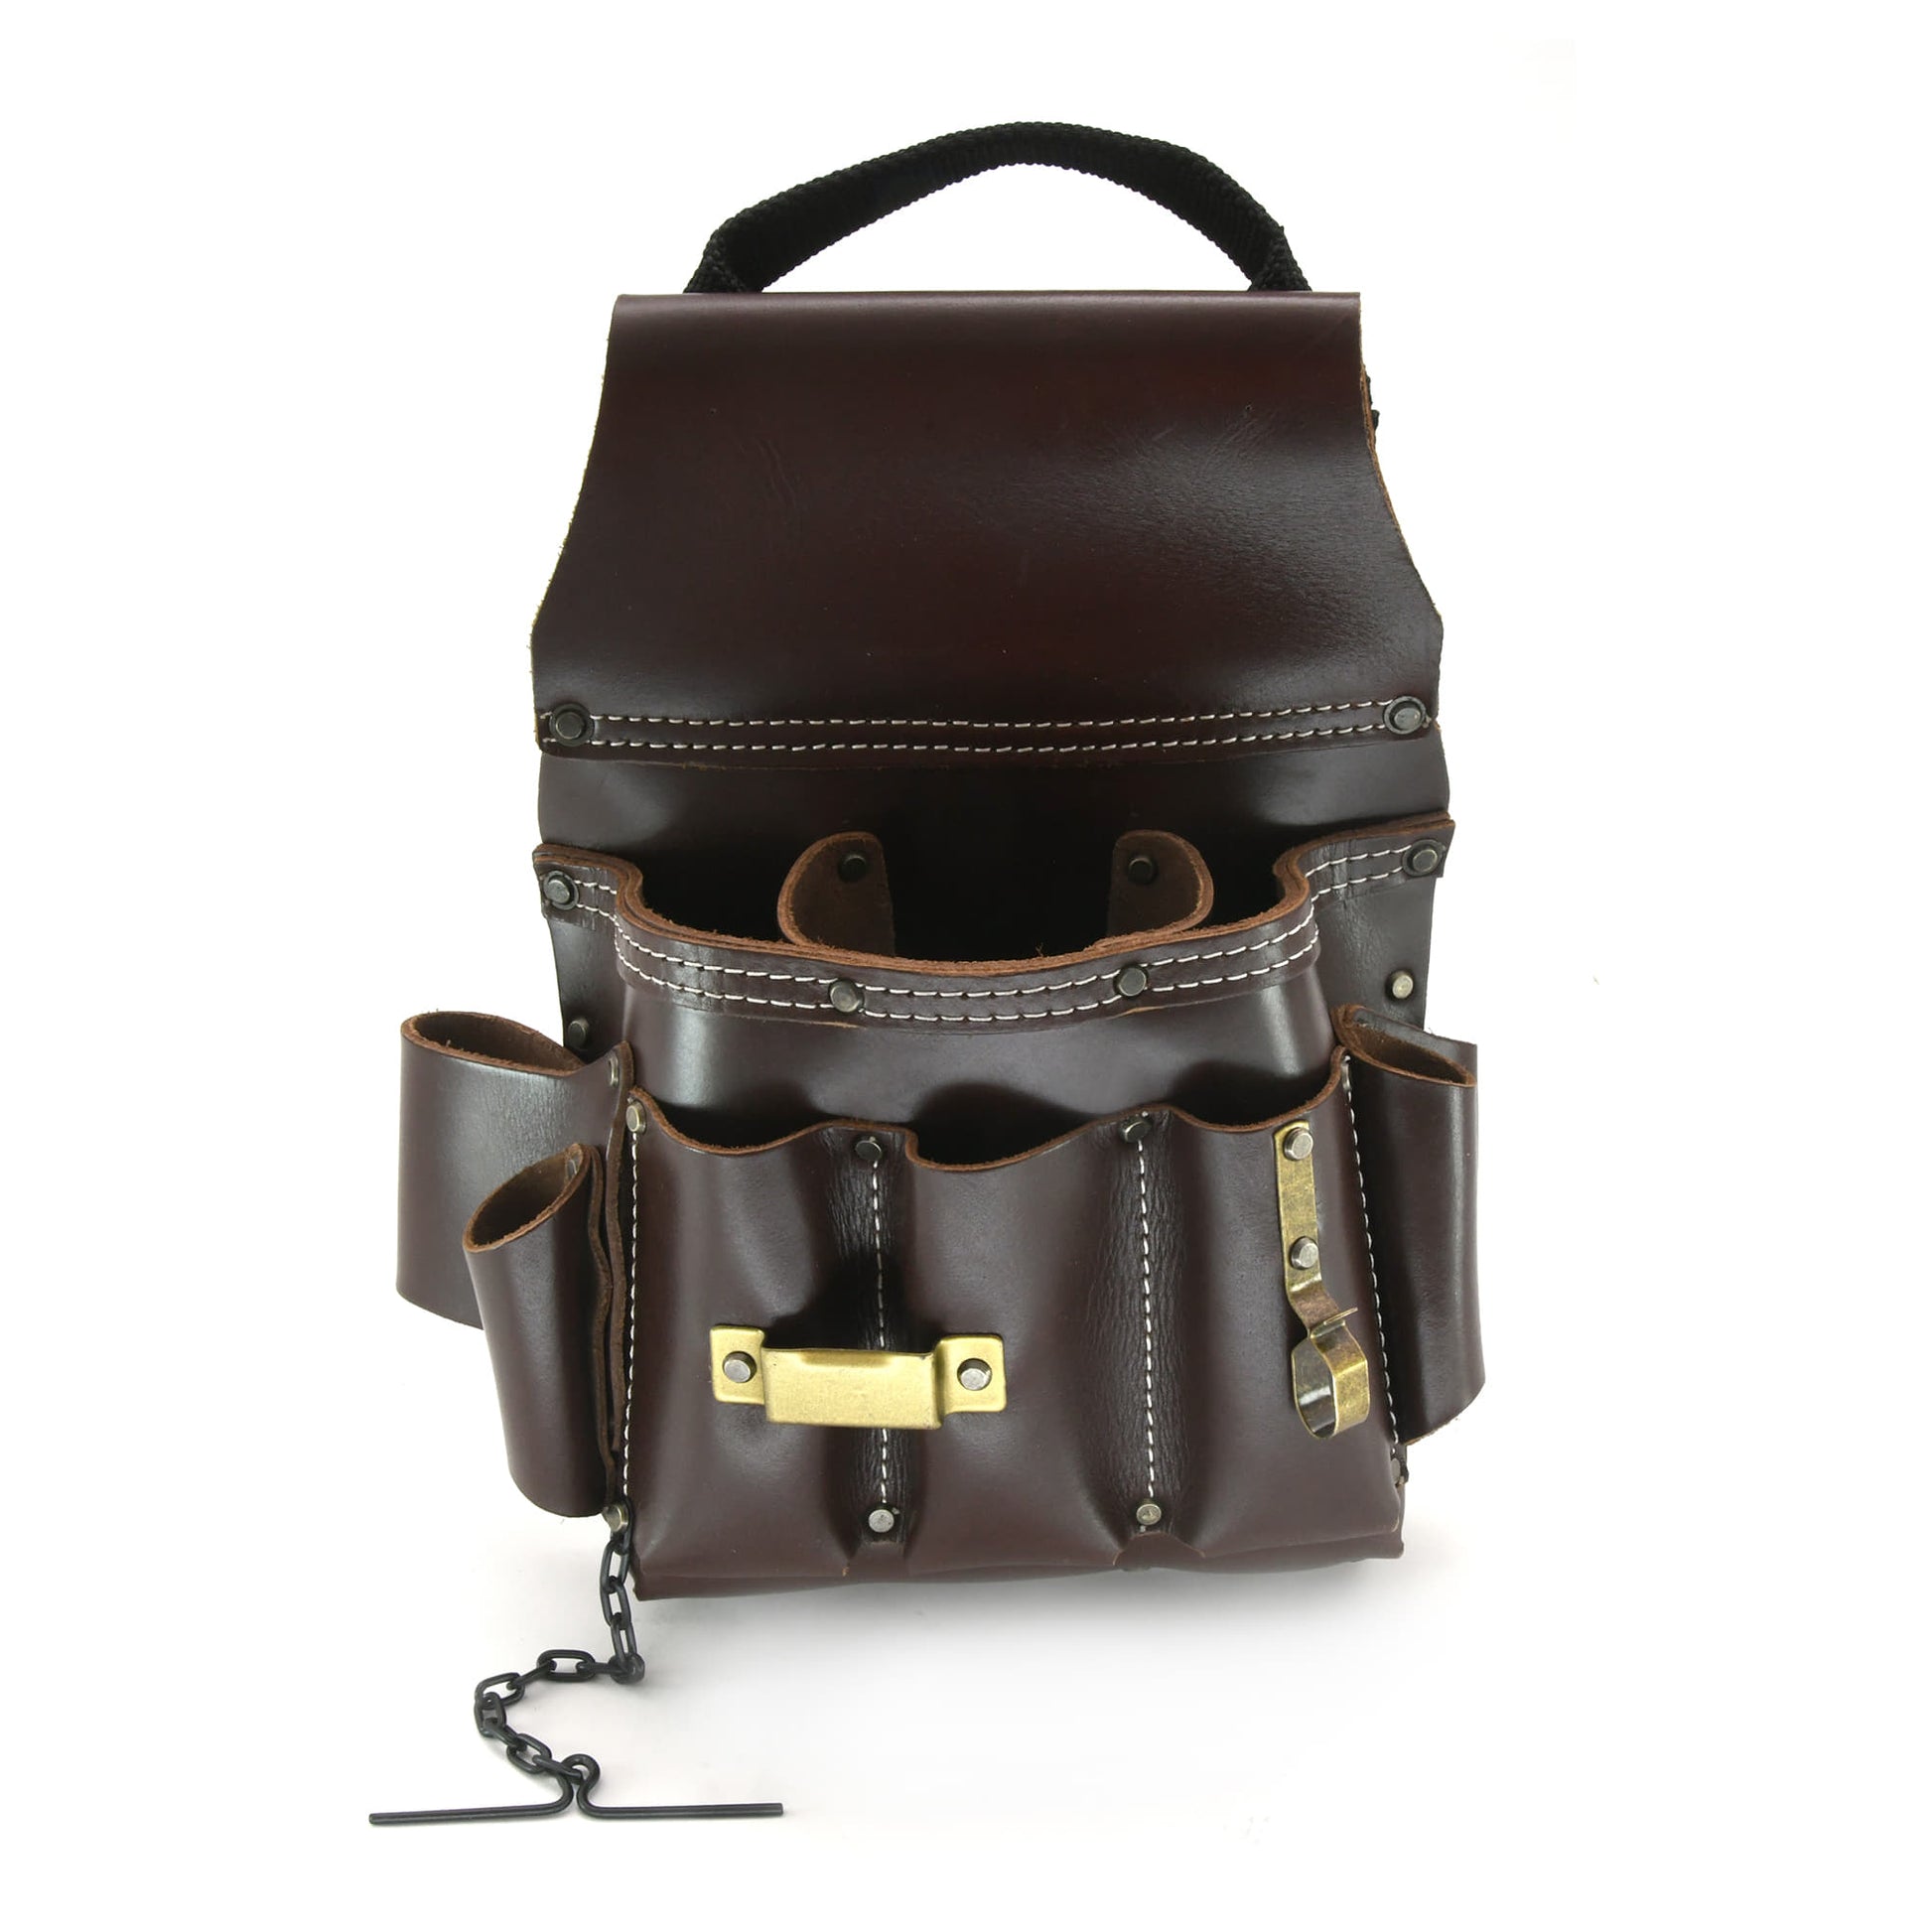 Style n Craft 98464 - Right Side Pouch of the 4 Piece 22 Pocket Electrician's Combo in Top Grain Leather Showing all the Pockets